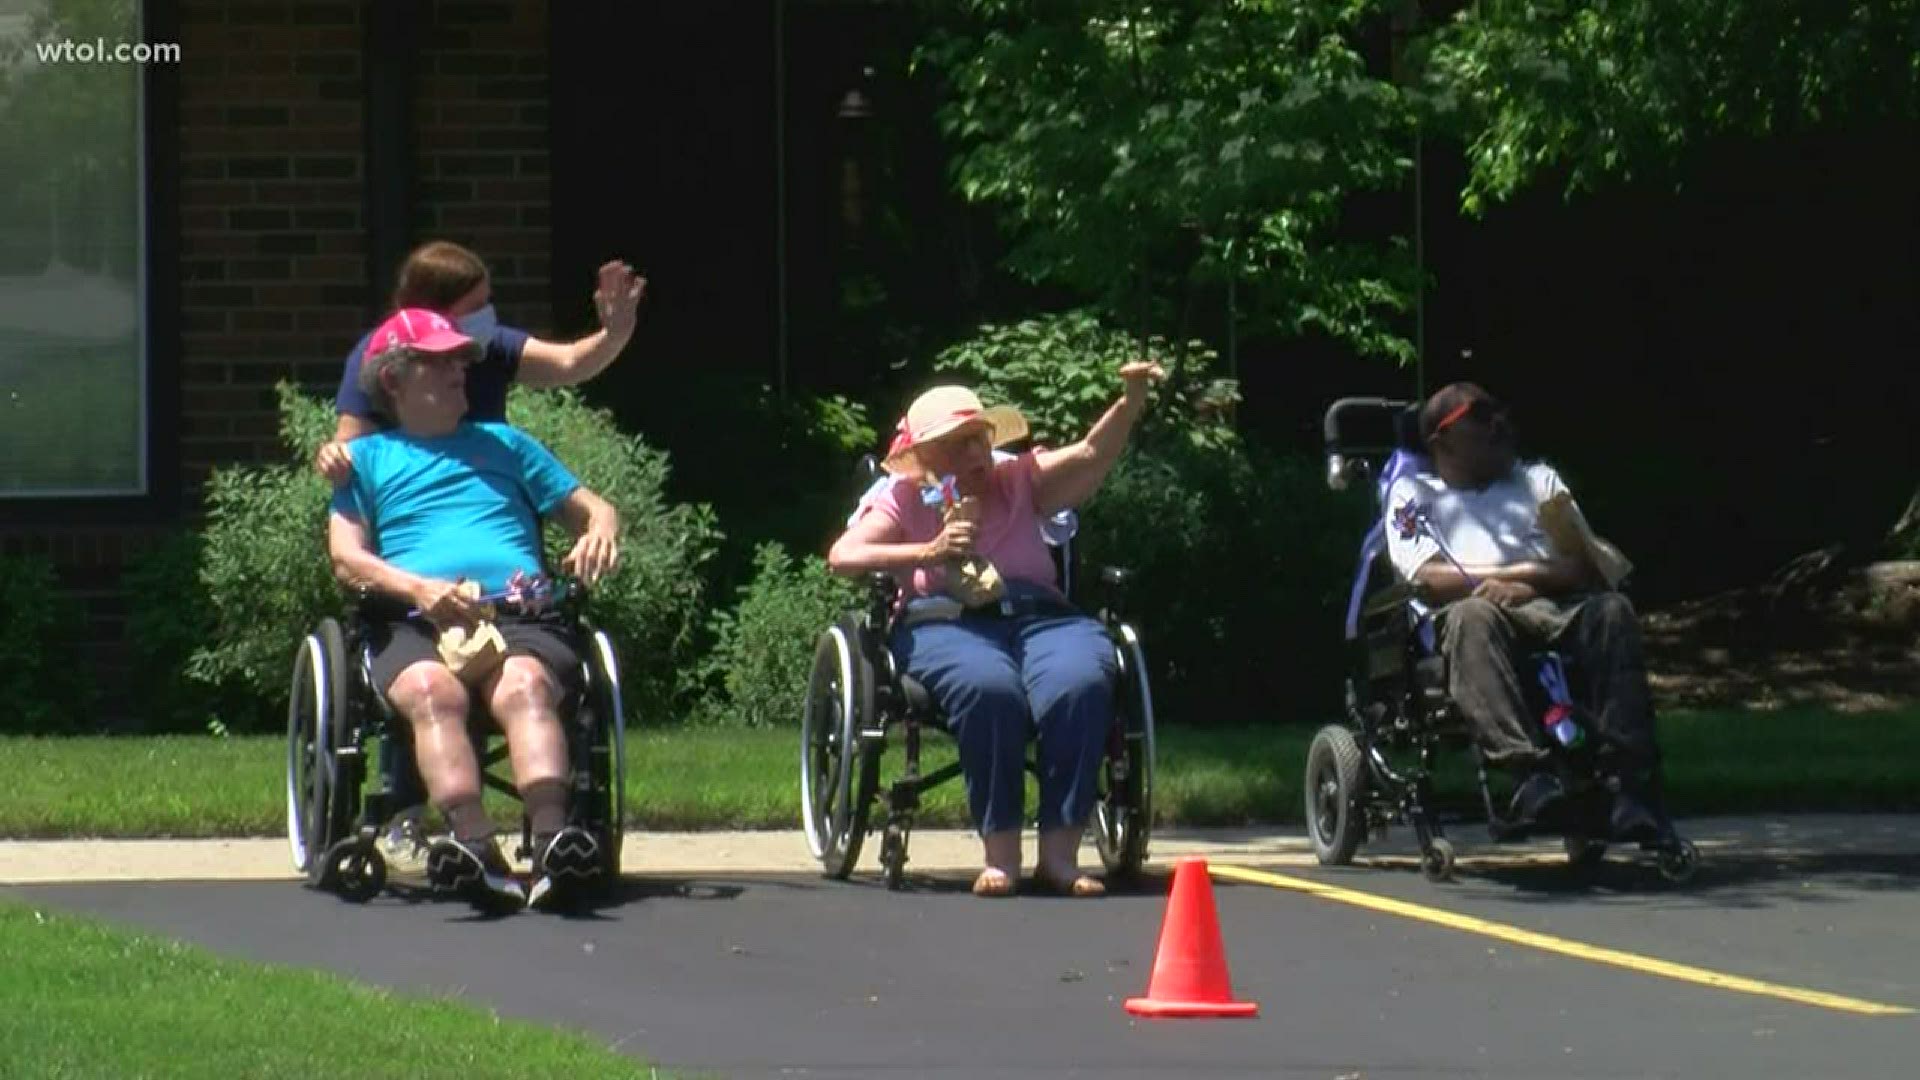 The 30 residents of Manahan, in south Toledo, have been unable to leave the facility or have visitors since mid-March.